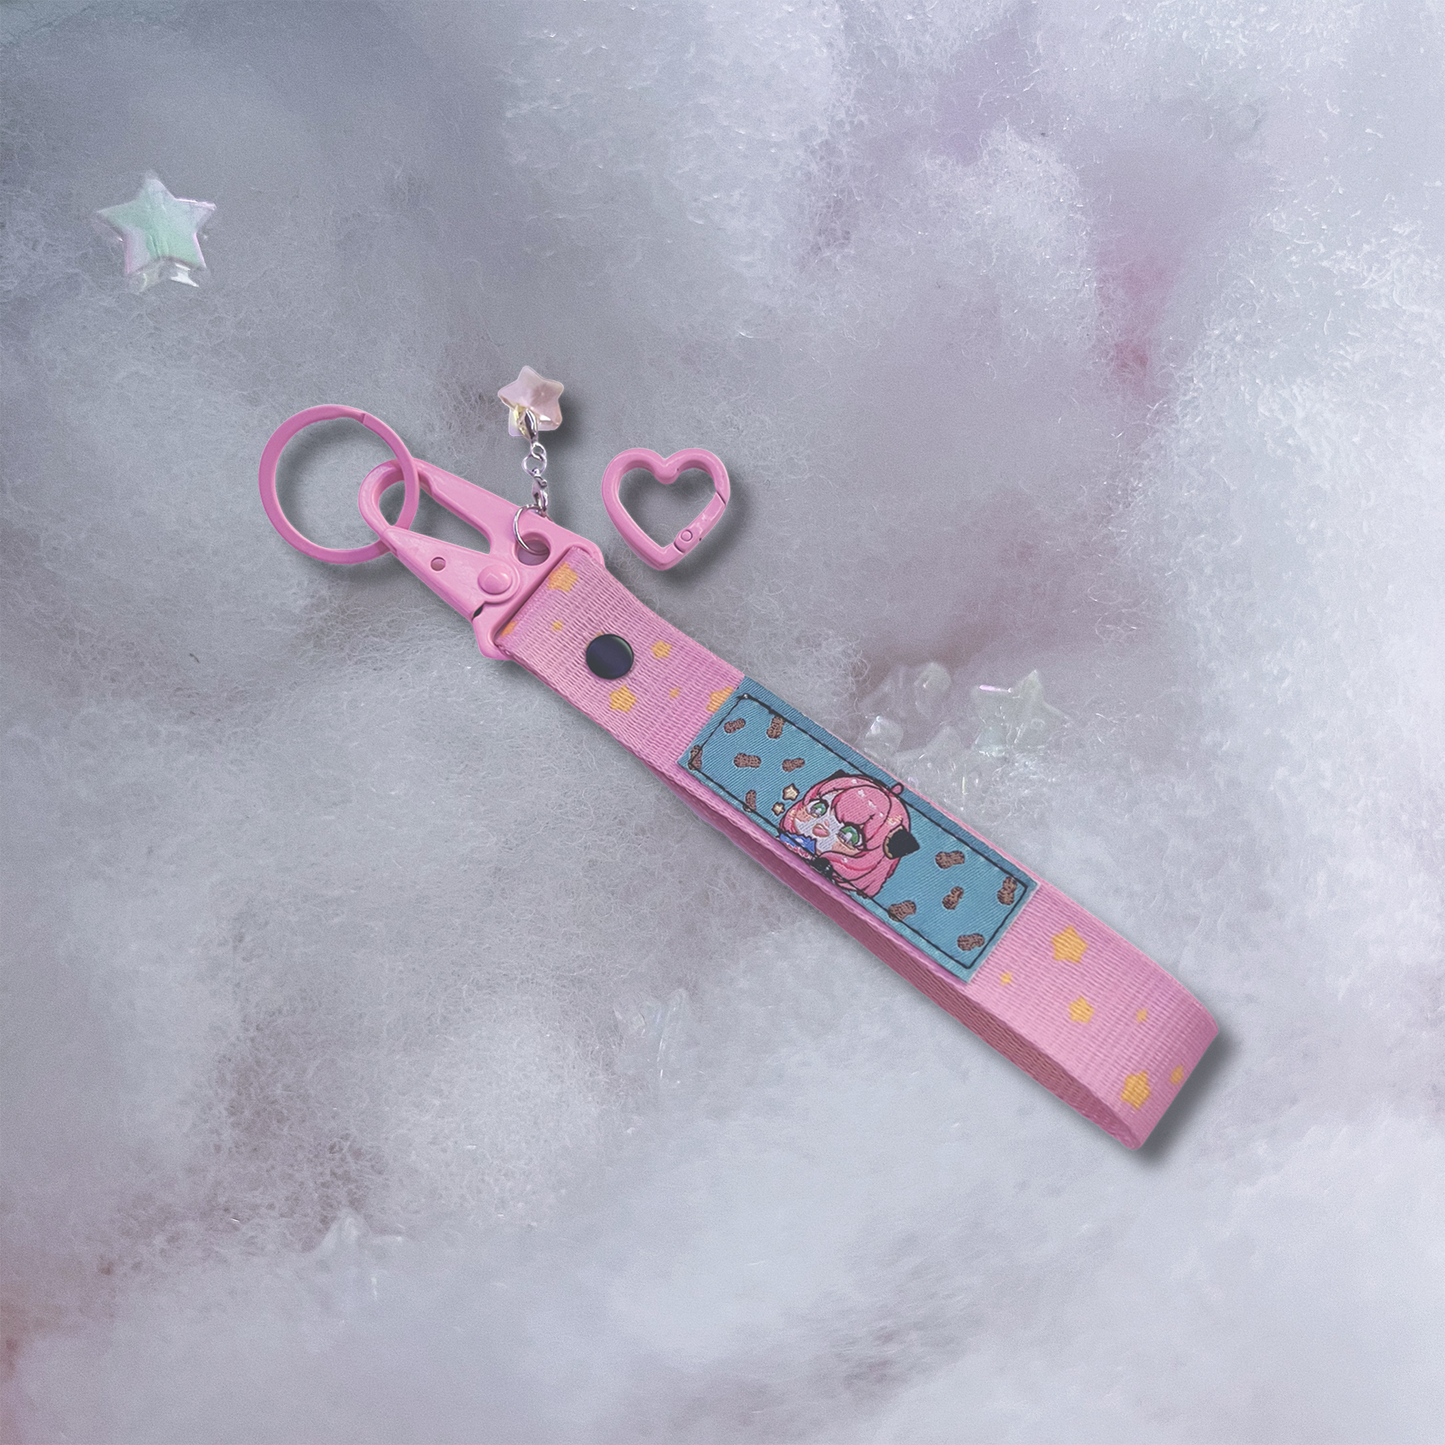 Anya Key Strap is a pink woven key strap with Anya Forger on a patch, with a star charm added and a heart carabiner attachment.